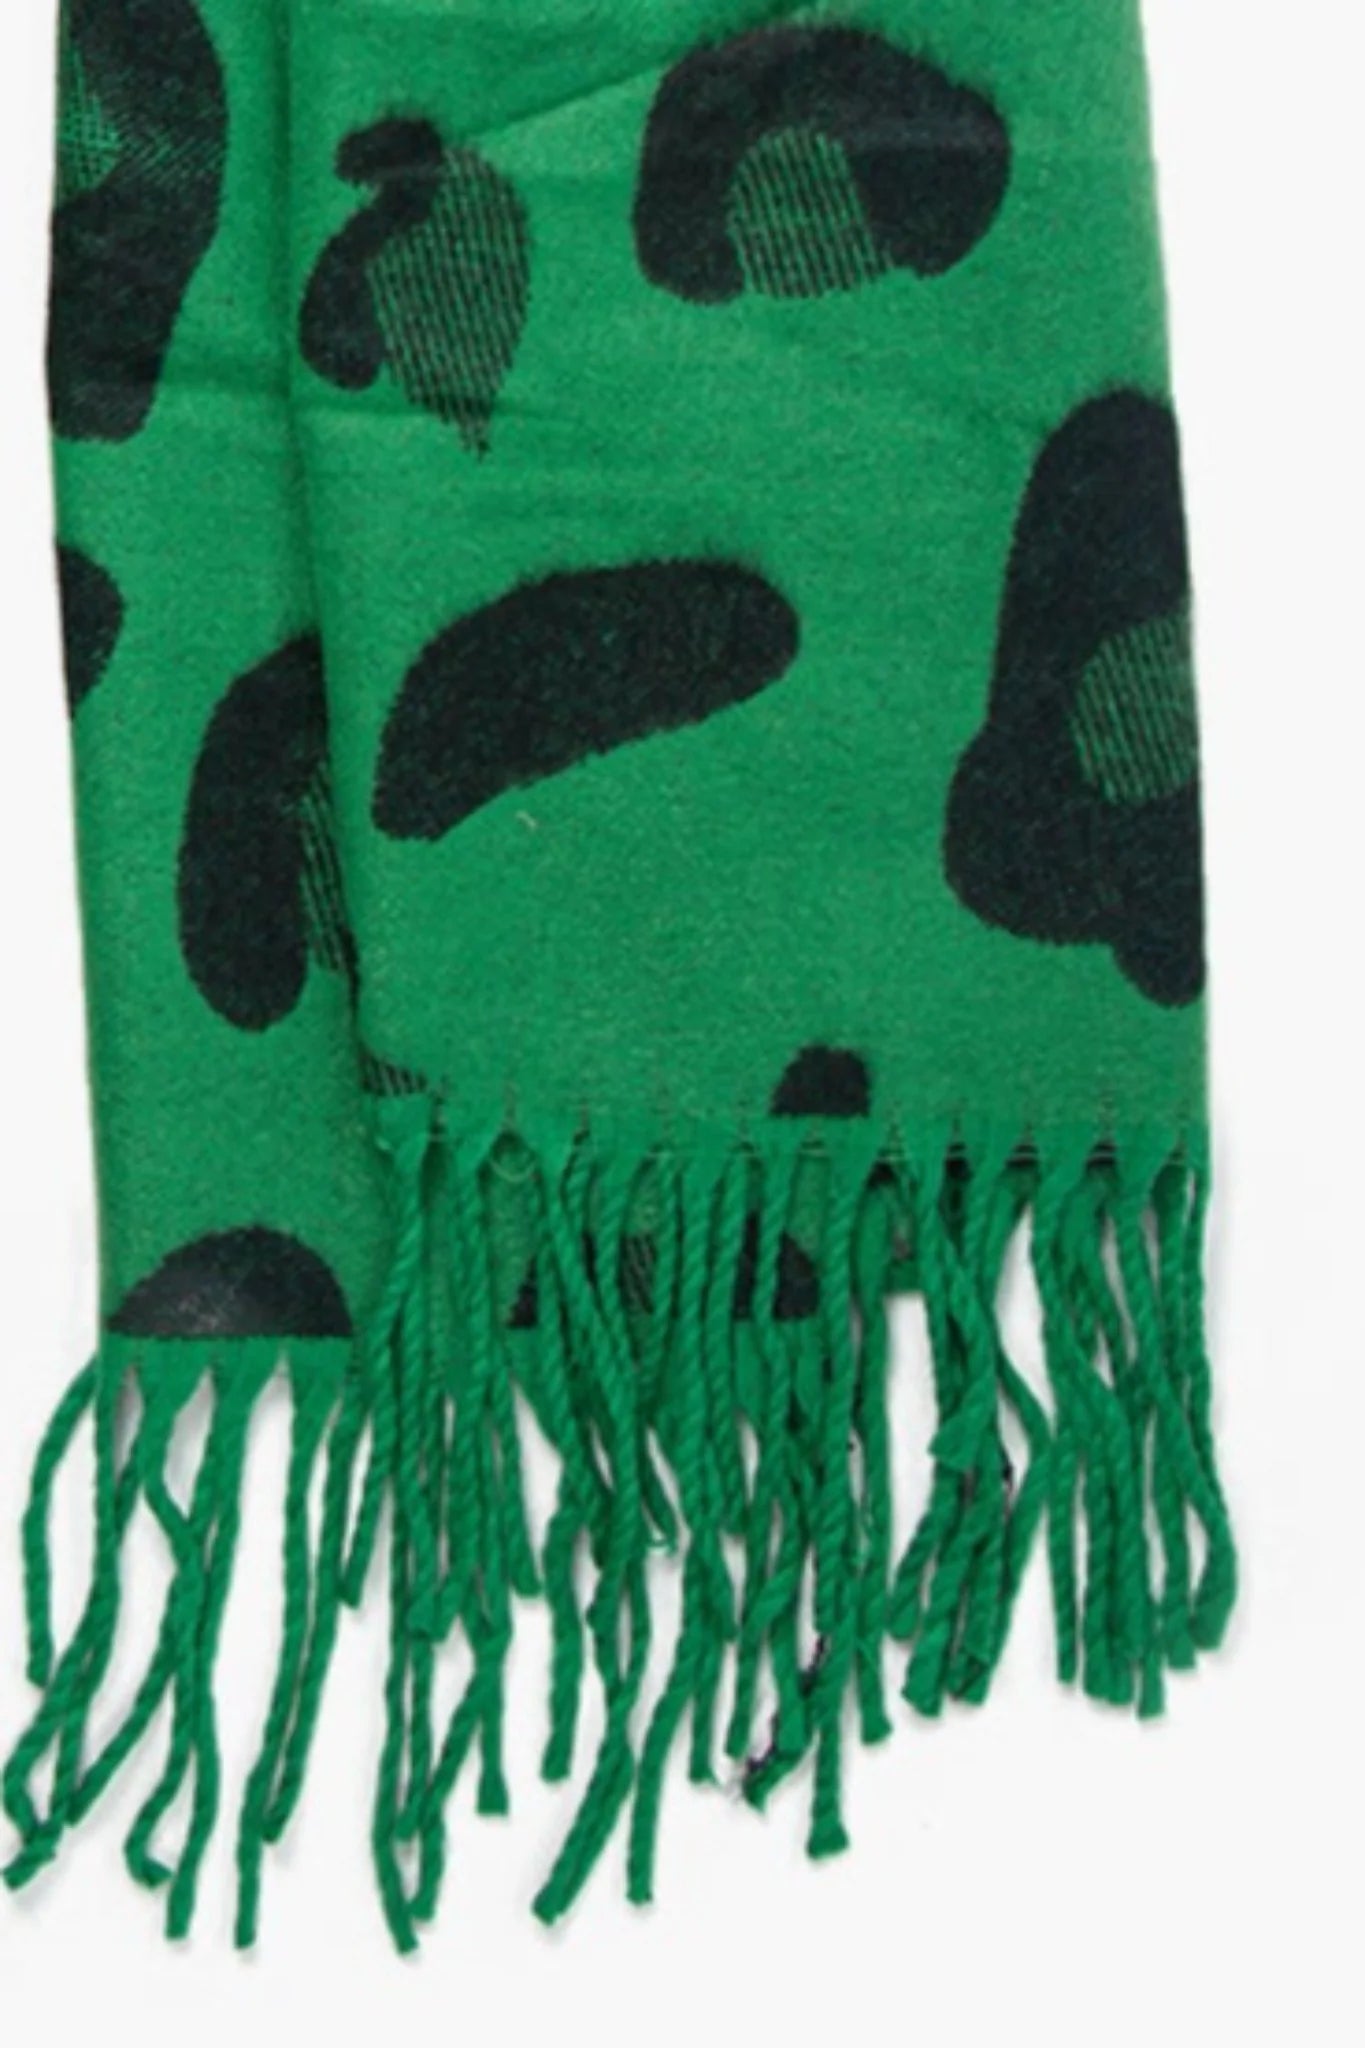 Warm Scarf with Tassels – Green and Black Leopard Print